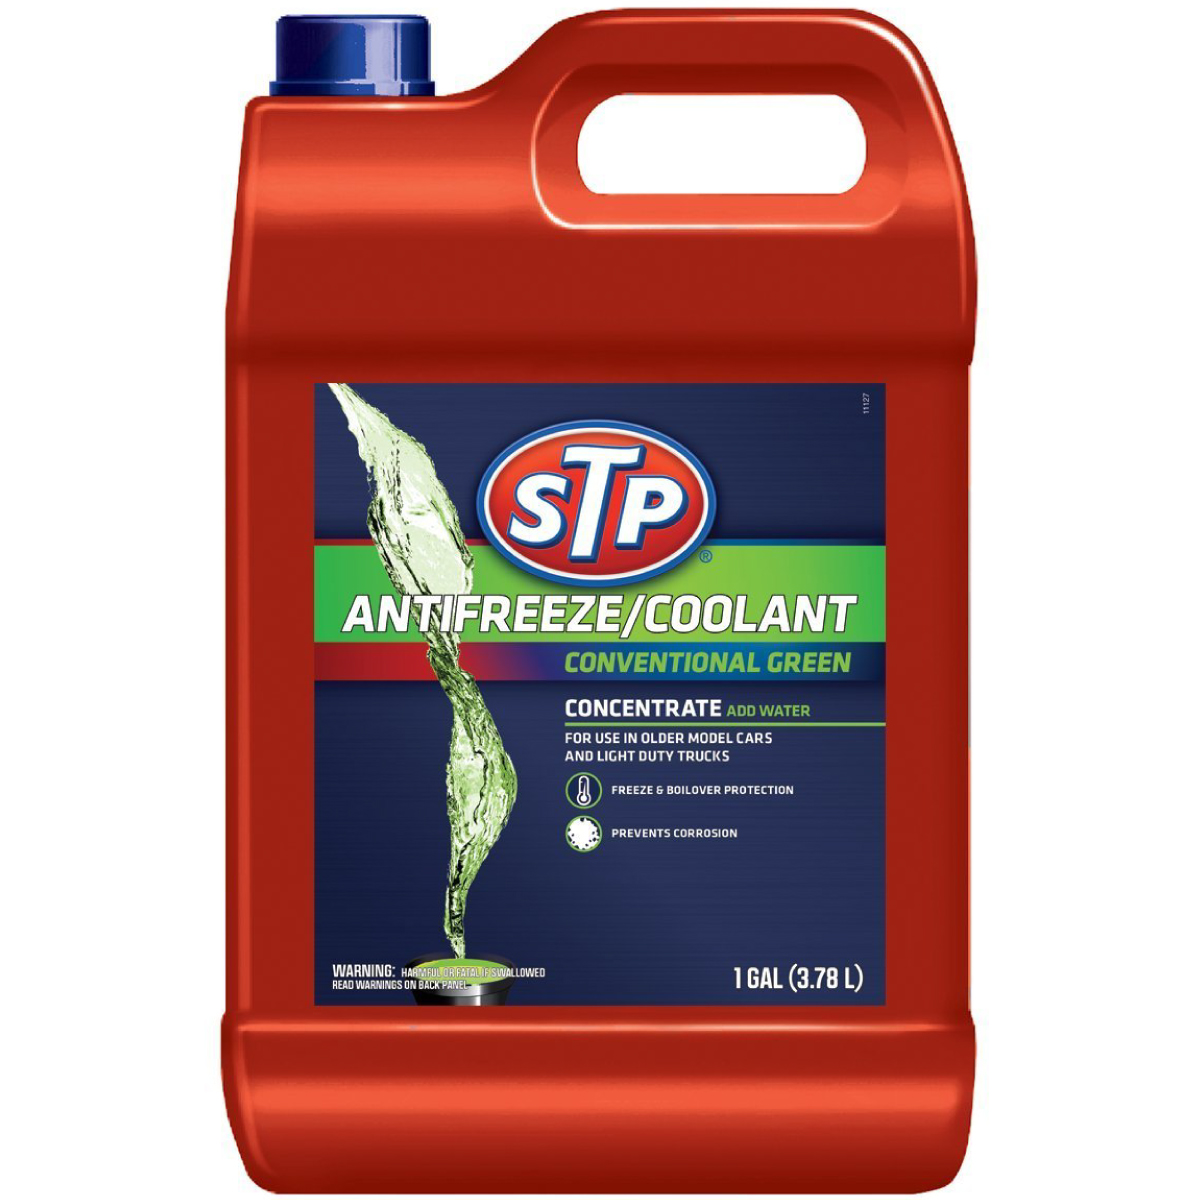 Antifreeze/Coolant Conventional Green 1 Gal Stp